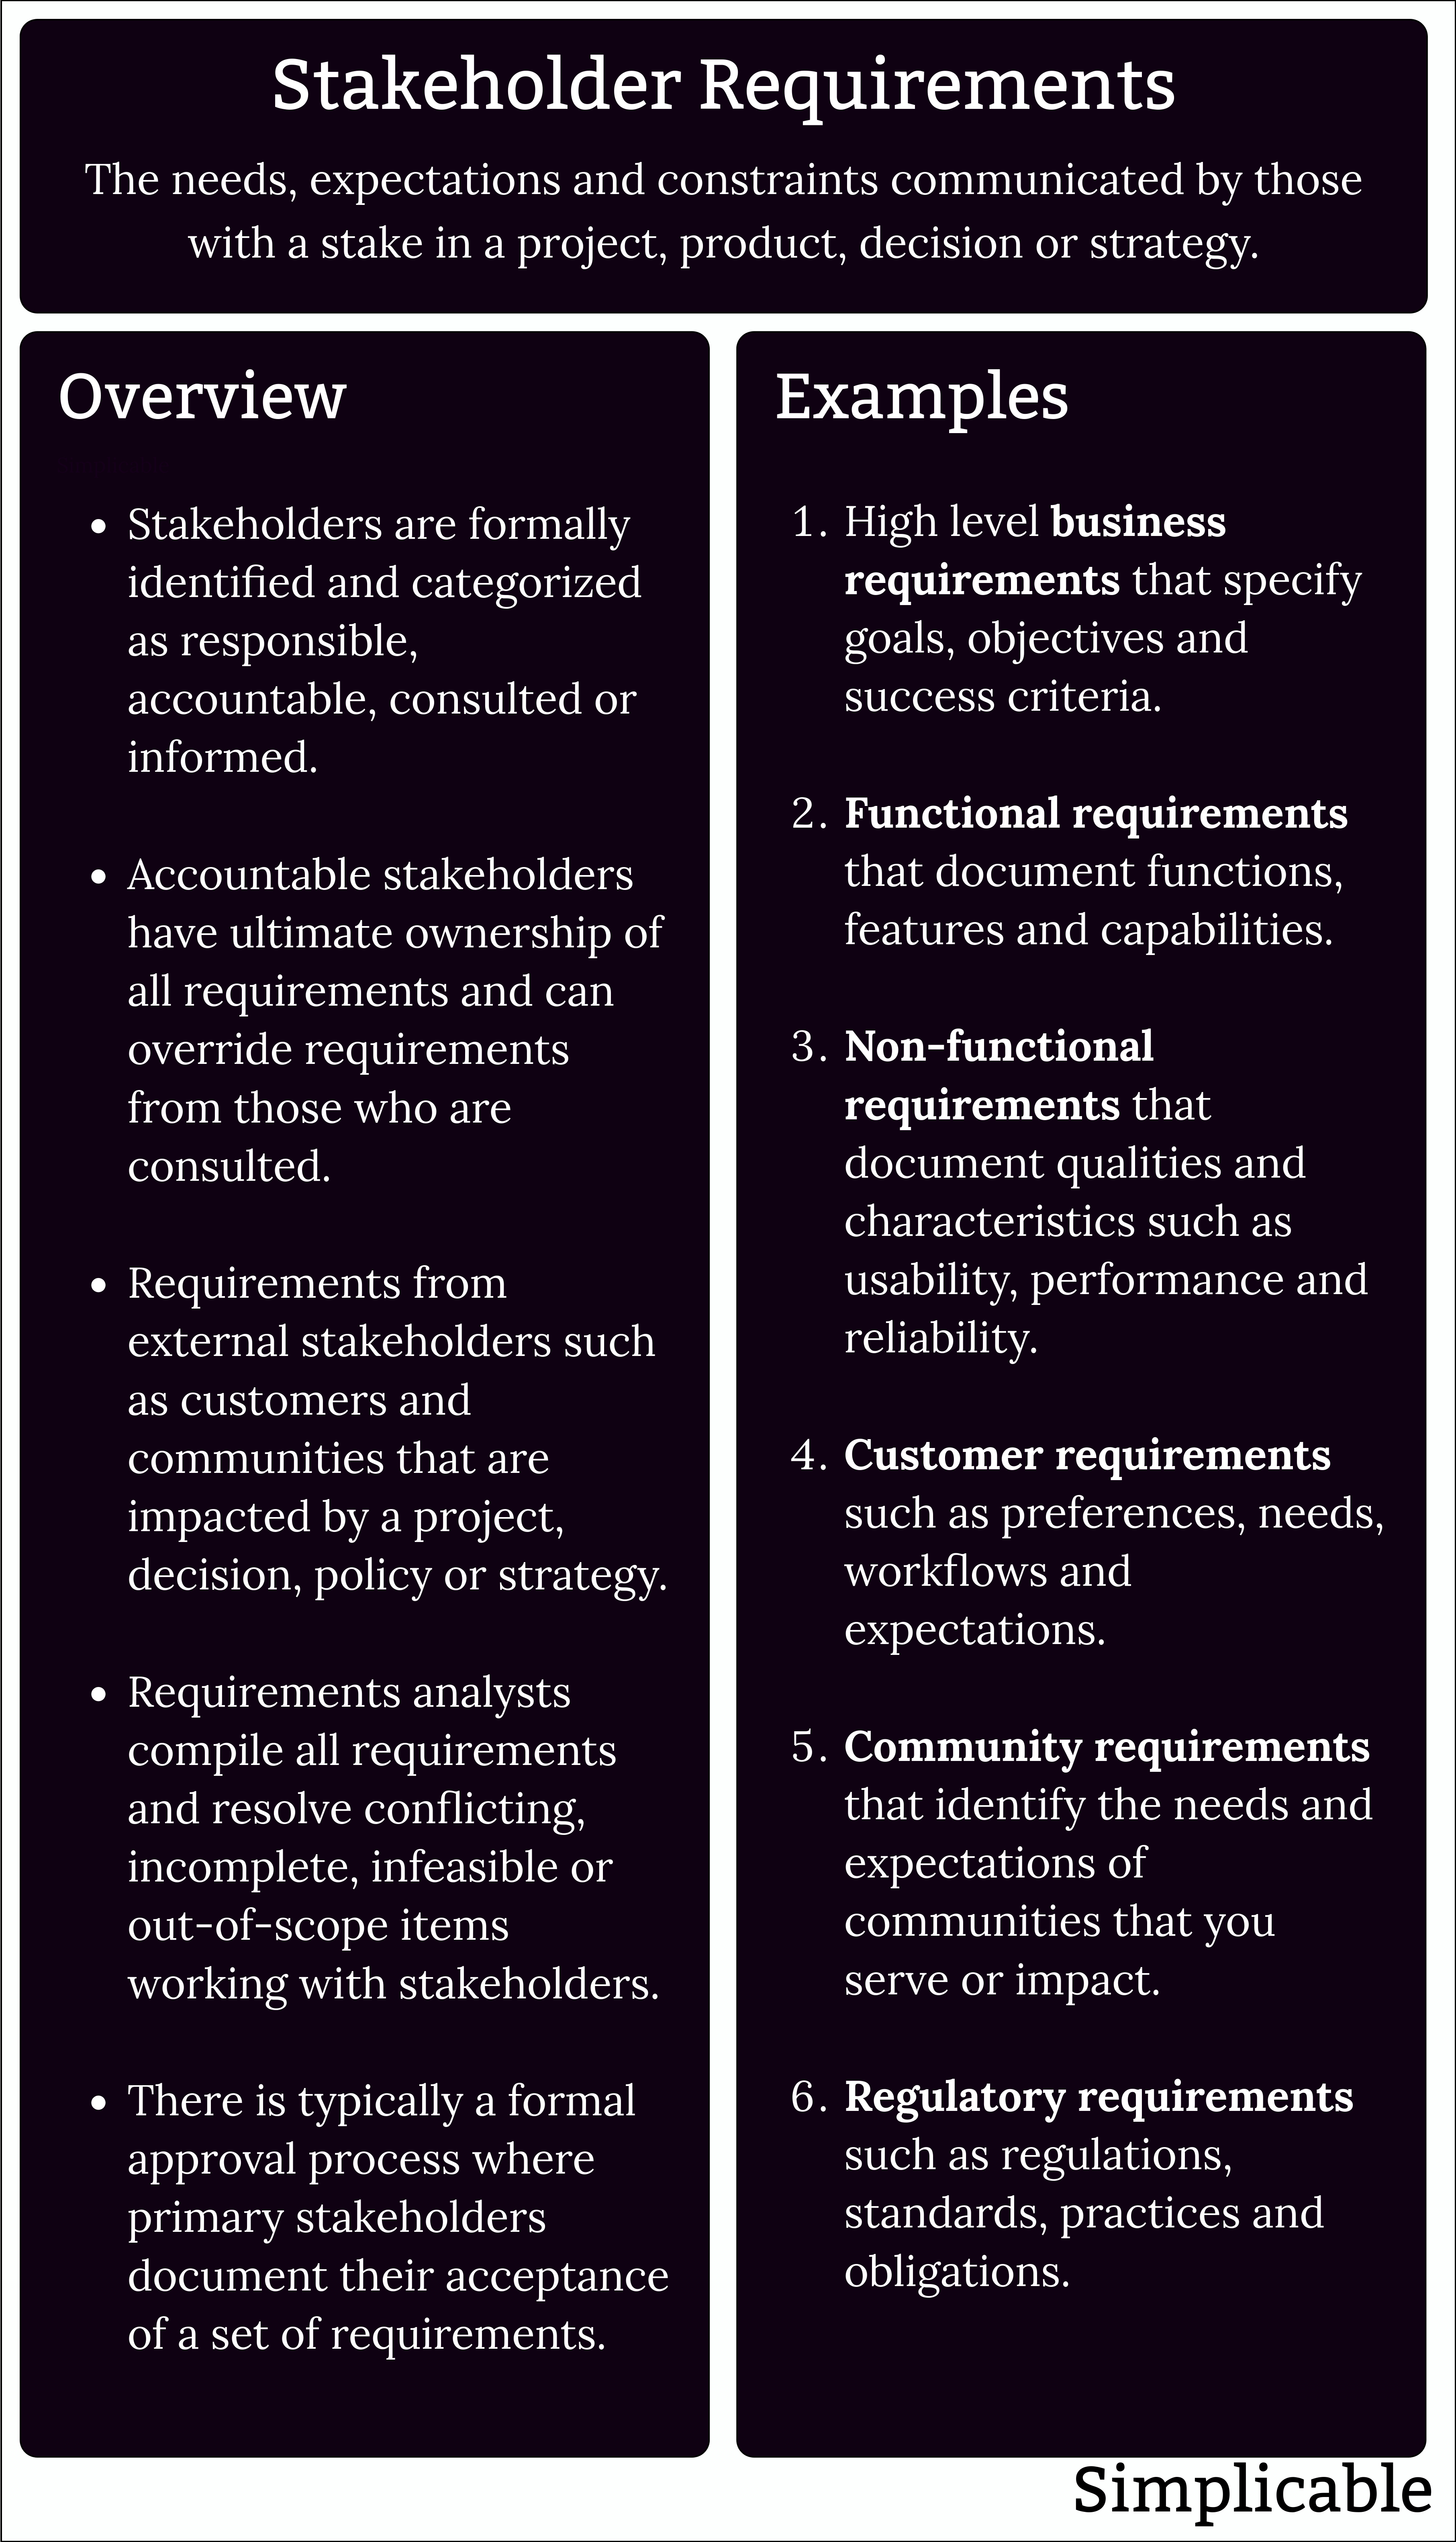 stakeholder requirements overview and examples